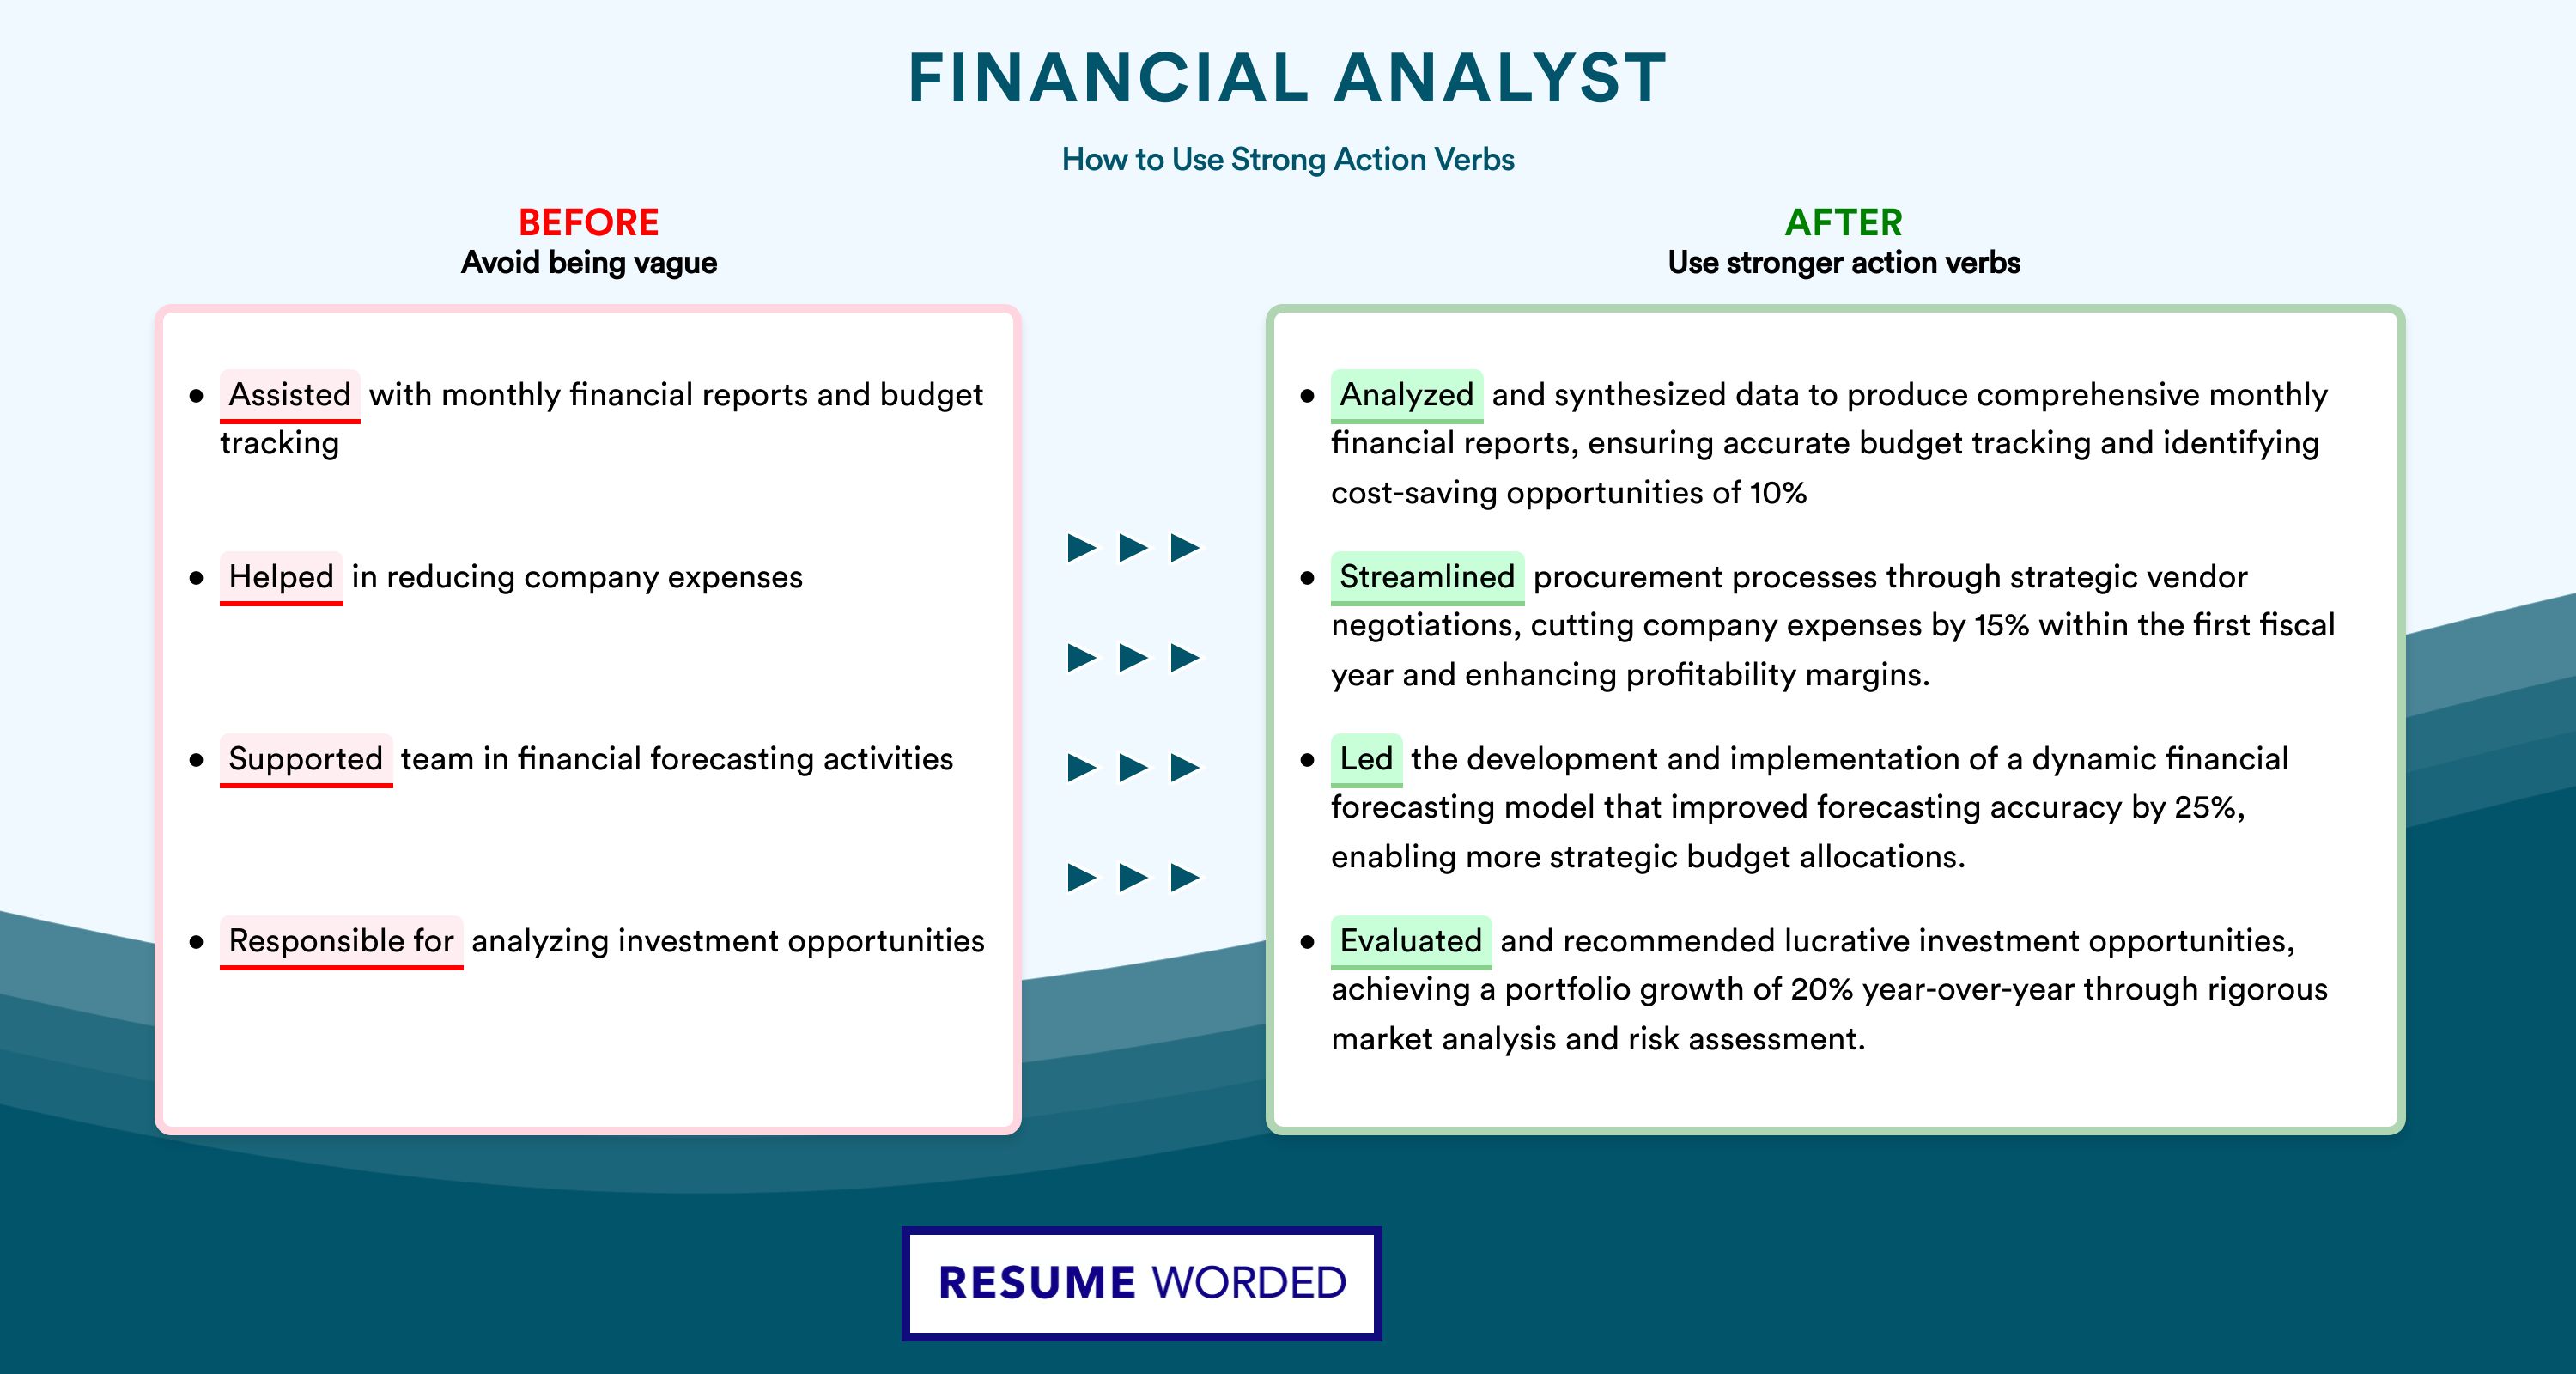 Action Verbs for Financial Analyst